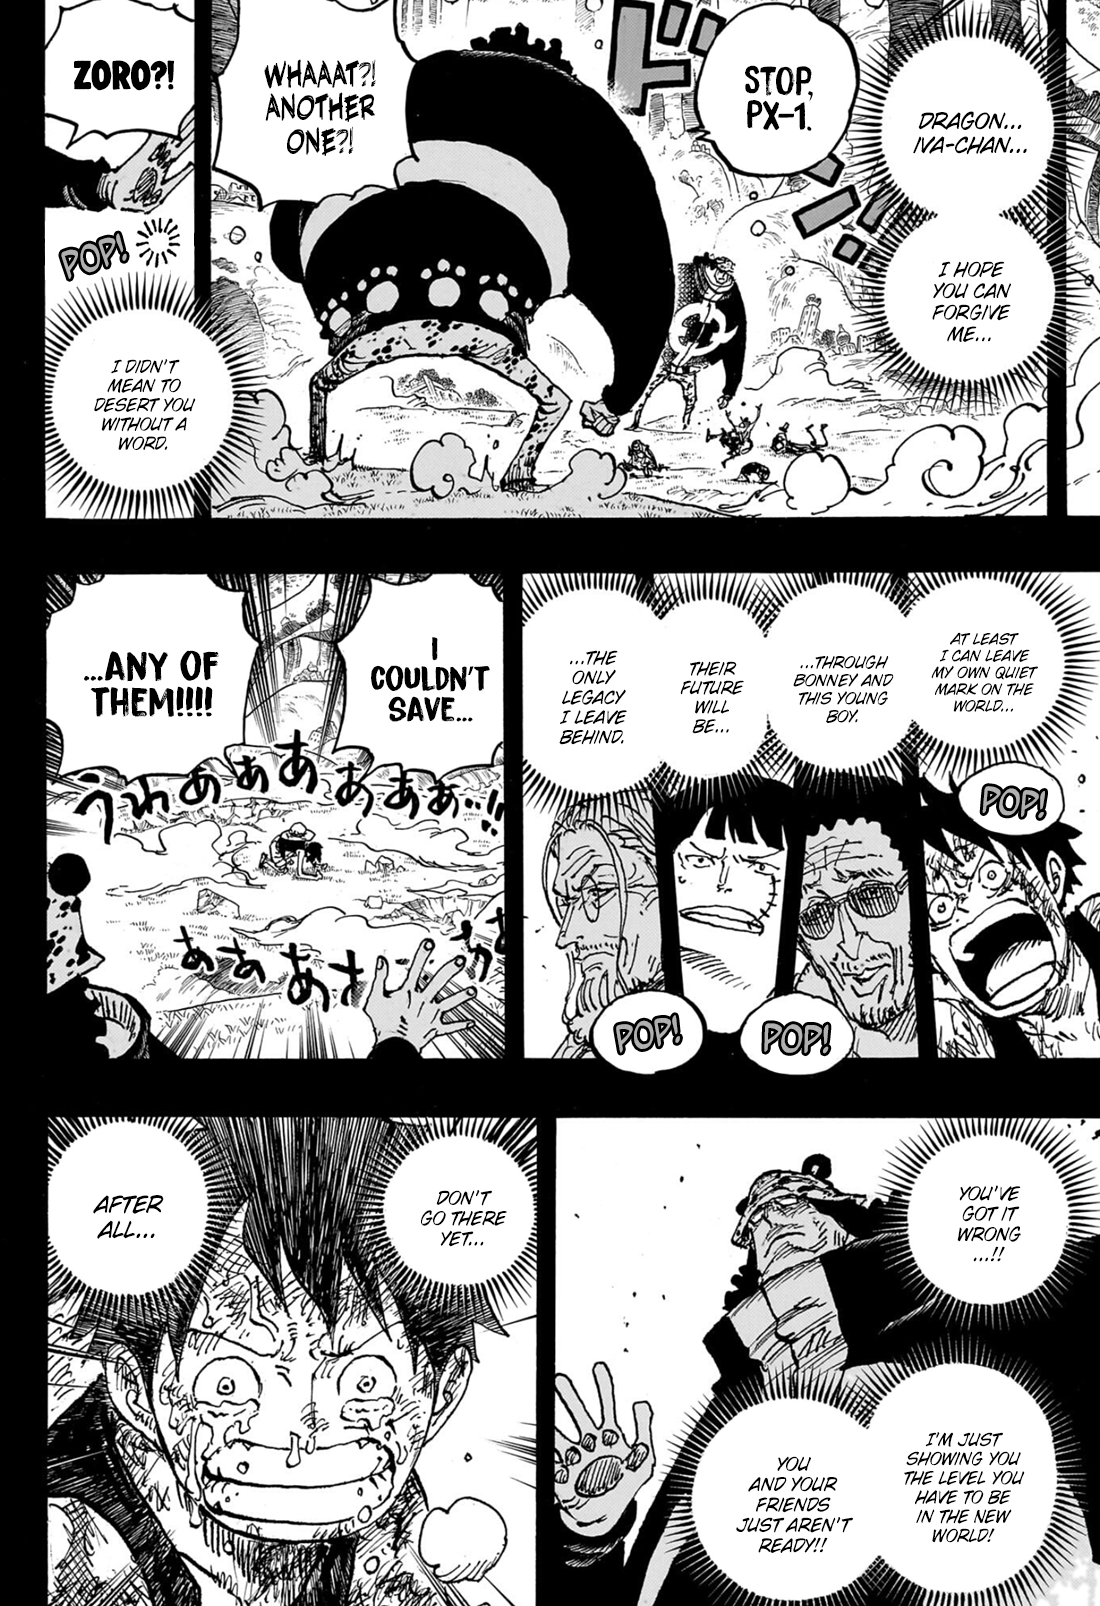 One Piece, Chapter 1102 - One Piece Manga Online